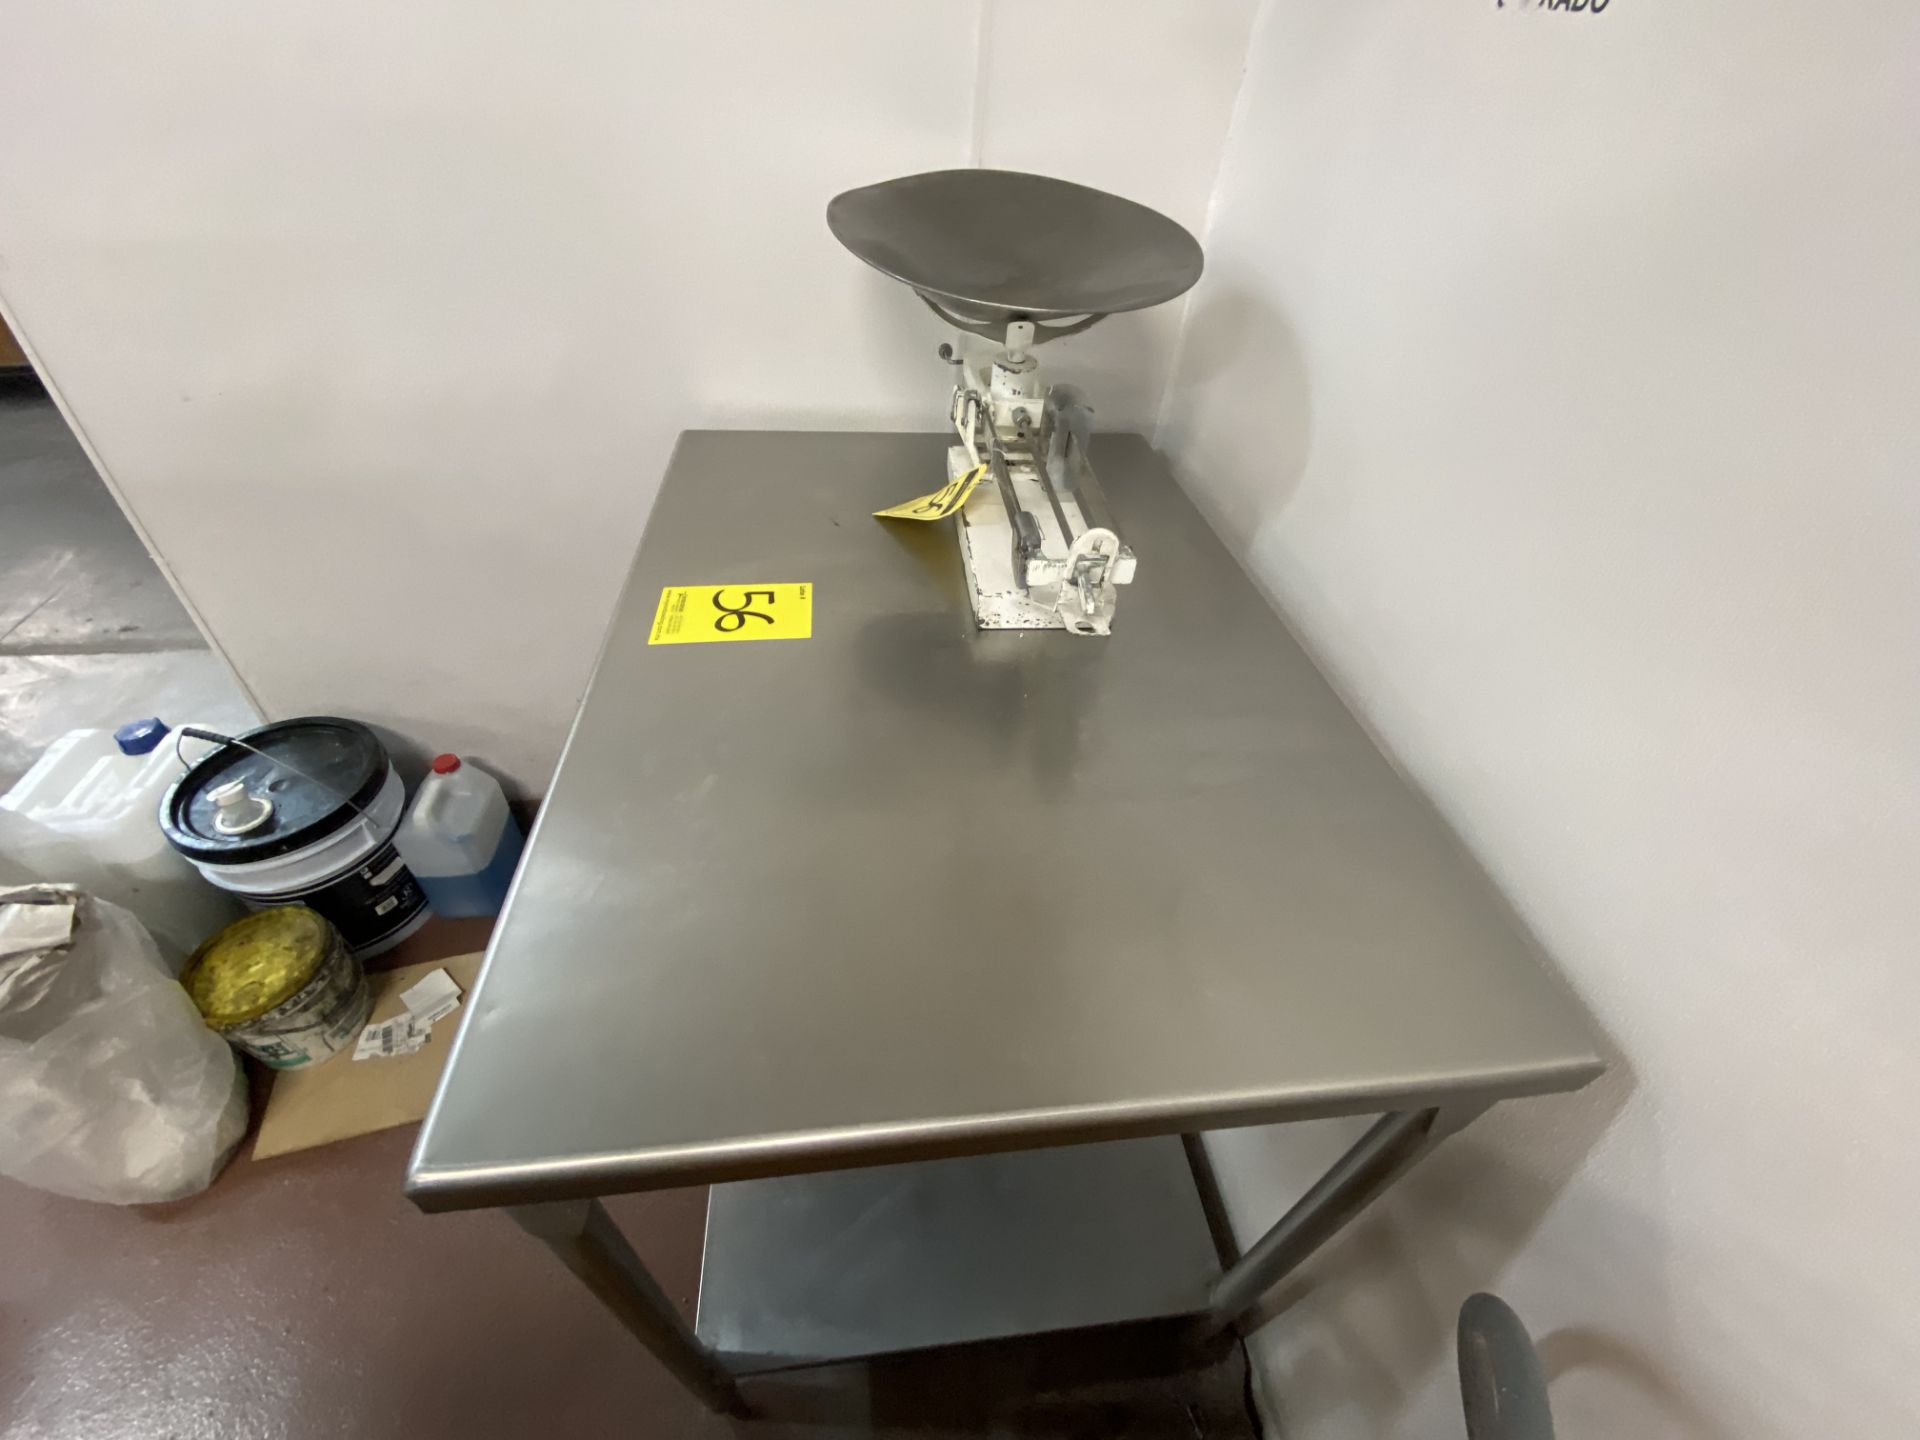 1 Stainless steel work table measures 1.00 x 0.70 x 0.90 meters; Includes balance scale - Image 5 of 5